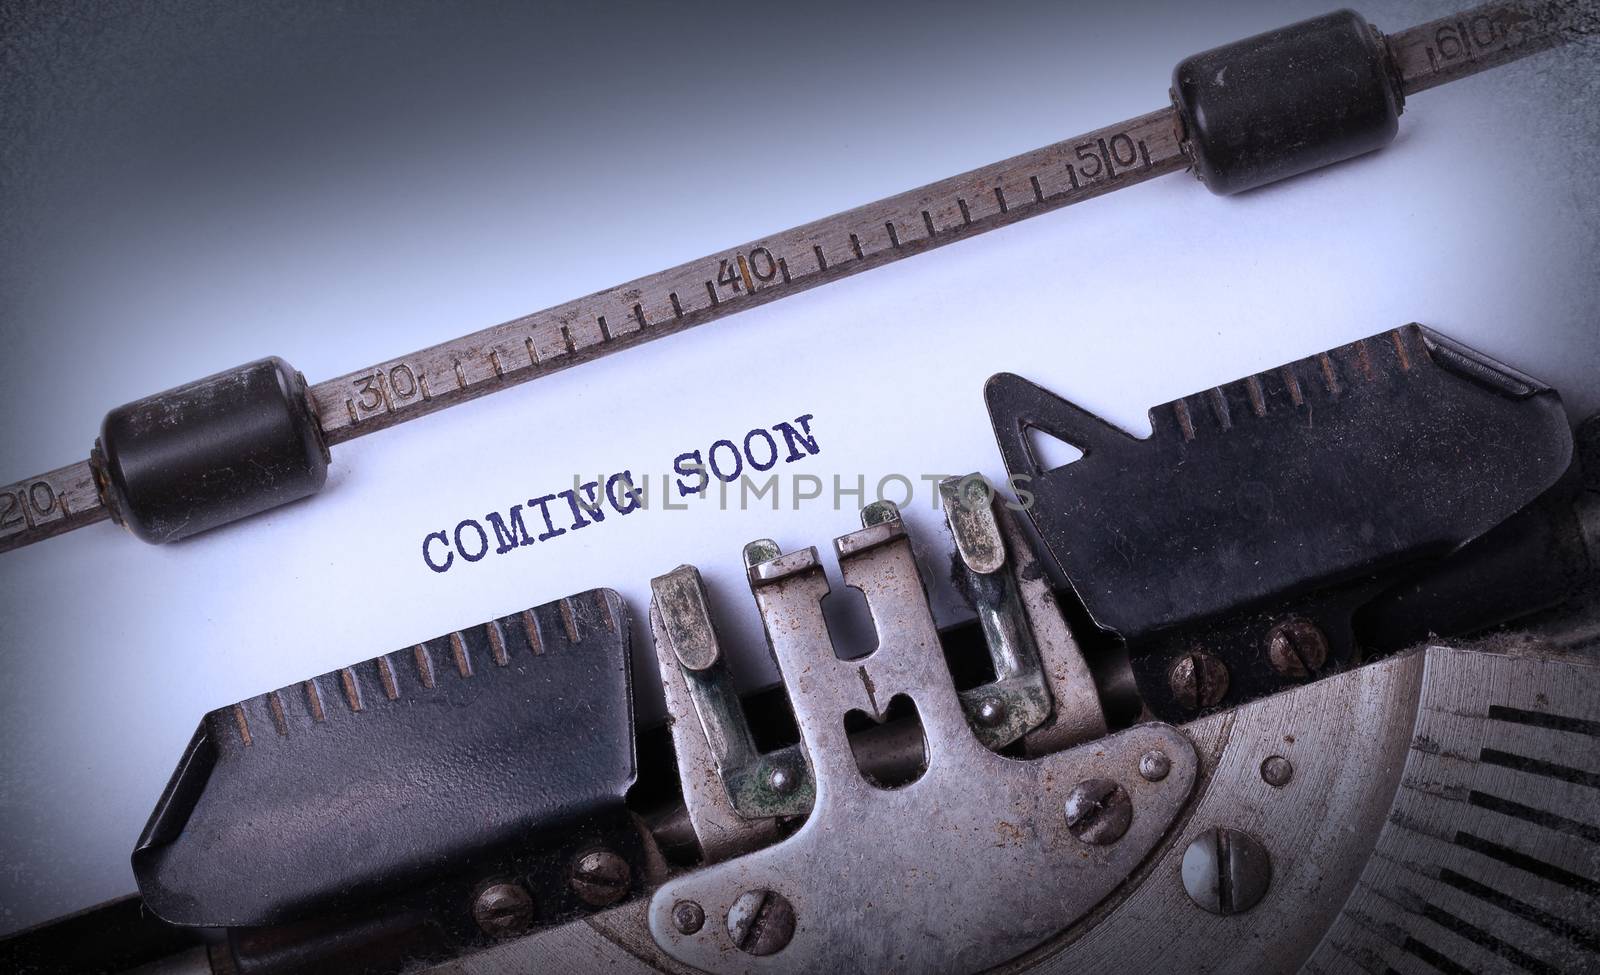 Vintage inscription made by old typewriter, coming soon